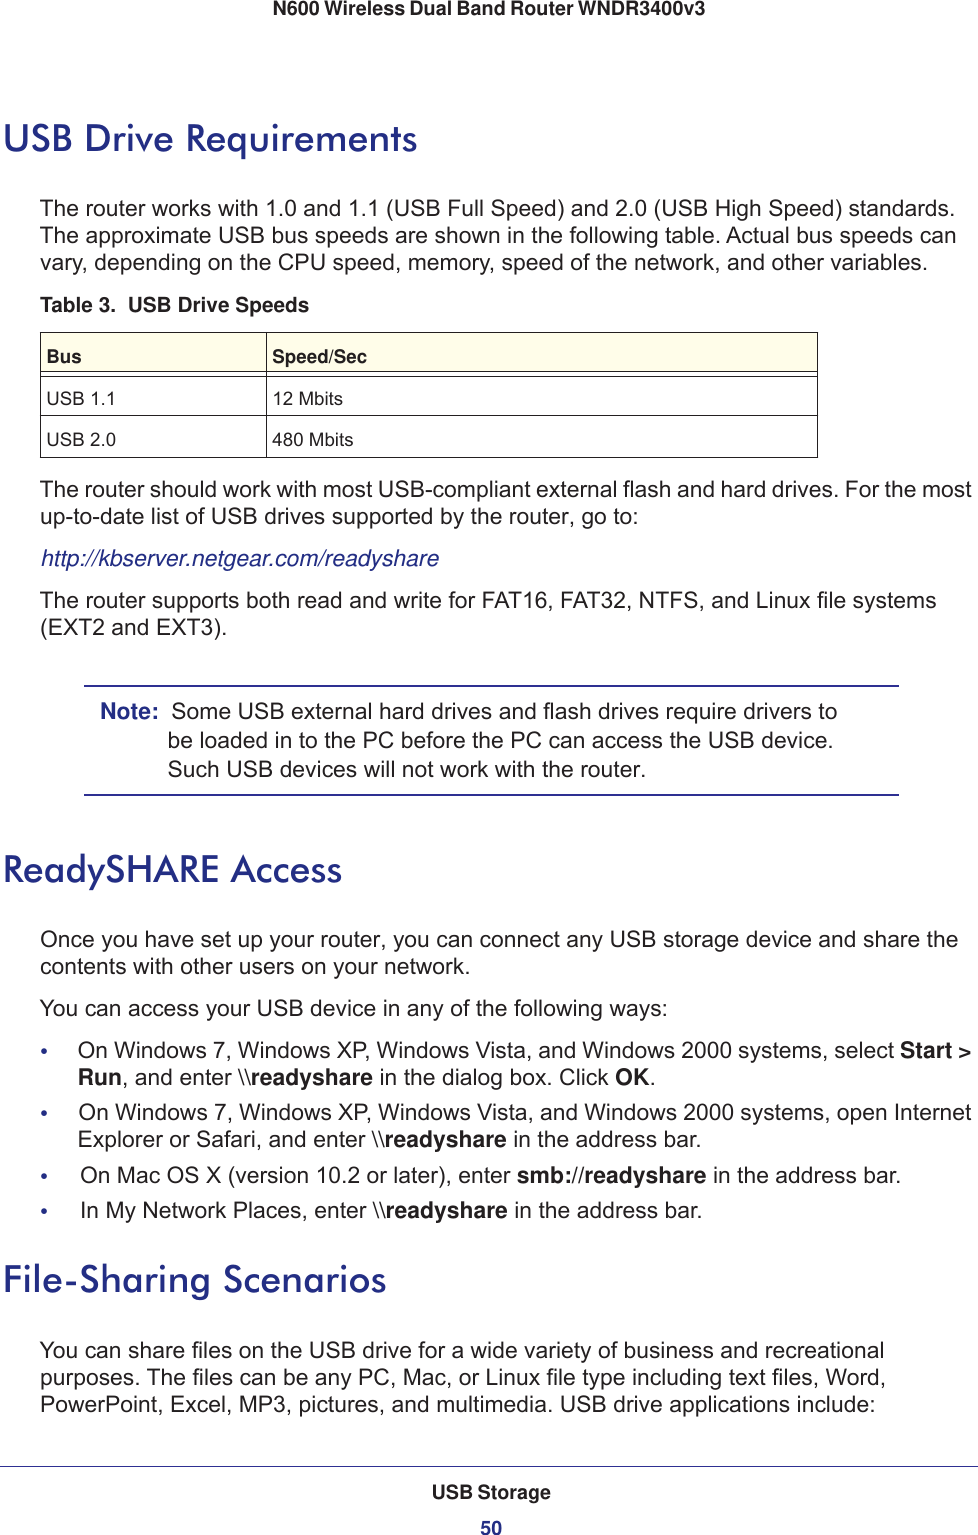 USB Storage50N600 Wireless Dual Band Router WNDR3400v3 USB Drive RequirementsThe router works with 1.0 and 1.1 (USB Full Speed) and 2.0 (USB High Speed) standards. The approximate USB bus speeds are shown in the following table. Actual bus speeds can vary, depending on the CPU speed, memory, speed of the network, and other variables.Table 3.  USB Drive SpeedsBus Speed/SecUSB 1.1 12 MbitsUSB 2.0 480 MbitsThe router should work with most USB-compliant external flash and hard drives. For the most up-to-date list of USB drives supported by the router, go to:http://kbserver.netgear.com/readyshareThe router supports both read and write for FAT16, FAT32, NTFS, and Linux file systems (EXT2 and EXT3).Note:  Some USB external hard drives and flash drives require drivers to be loaded in to the PC before the PC can access the USB device. Such USB devices will not work with the router.ReadySHARE AccessOnce you have set up your router, you can connect any USB storage device and share the contents with other users on your network.You can access your USB device in any of the following ways:•     On Windows 7, Windows XP, Windows Vista, and Windows 2000 systems, select Start &gt; Run, and enter \\readyshare in the dialog box. Click OK.•     On Windows 7, Windows XP, Windows Vista, and Windows 2000 systems, open Internet Explorer or Safari, and enter \\readyshare in the address bar.•     On Mac OS X (version 10.2 or later), enter smb://readyshare in the address bar.•     In My Network Places, enter \\readyshare in the address bar.File-Sharing ScenariosYou can share files on the USB drive for a wide variety of business and recreational purposes. The files can be any PC, Mac, or Linux file type including text files, Word, PowerPoint, Excel, MP3, pictures, and multimedia. USB drive applications include: